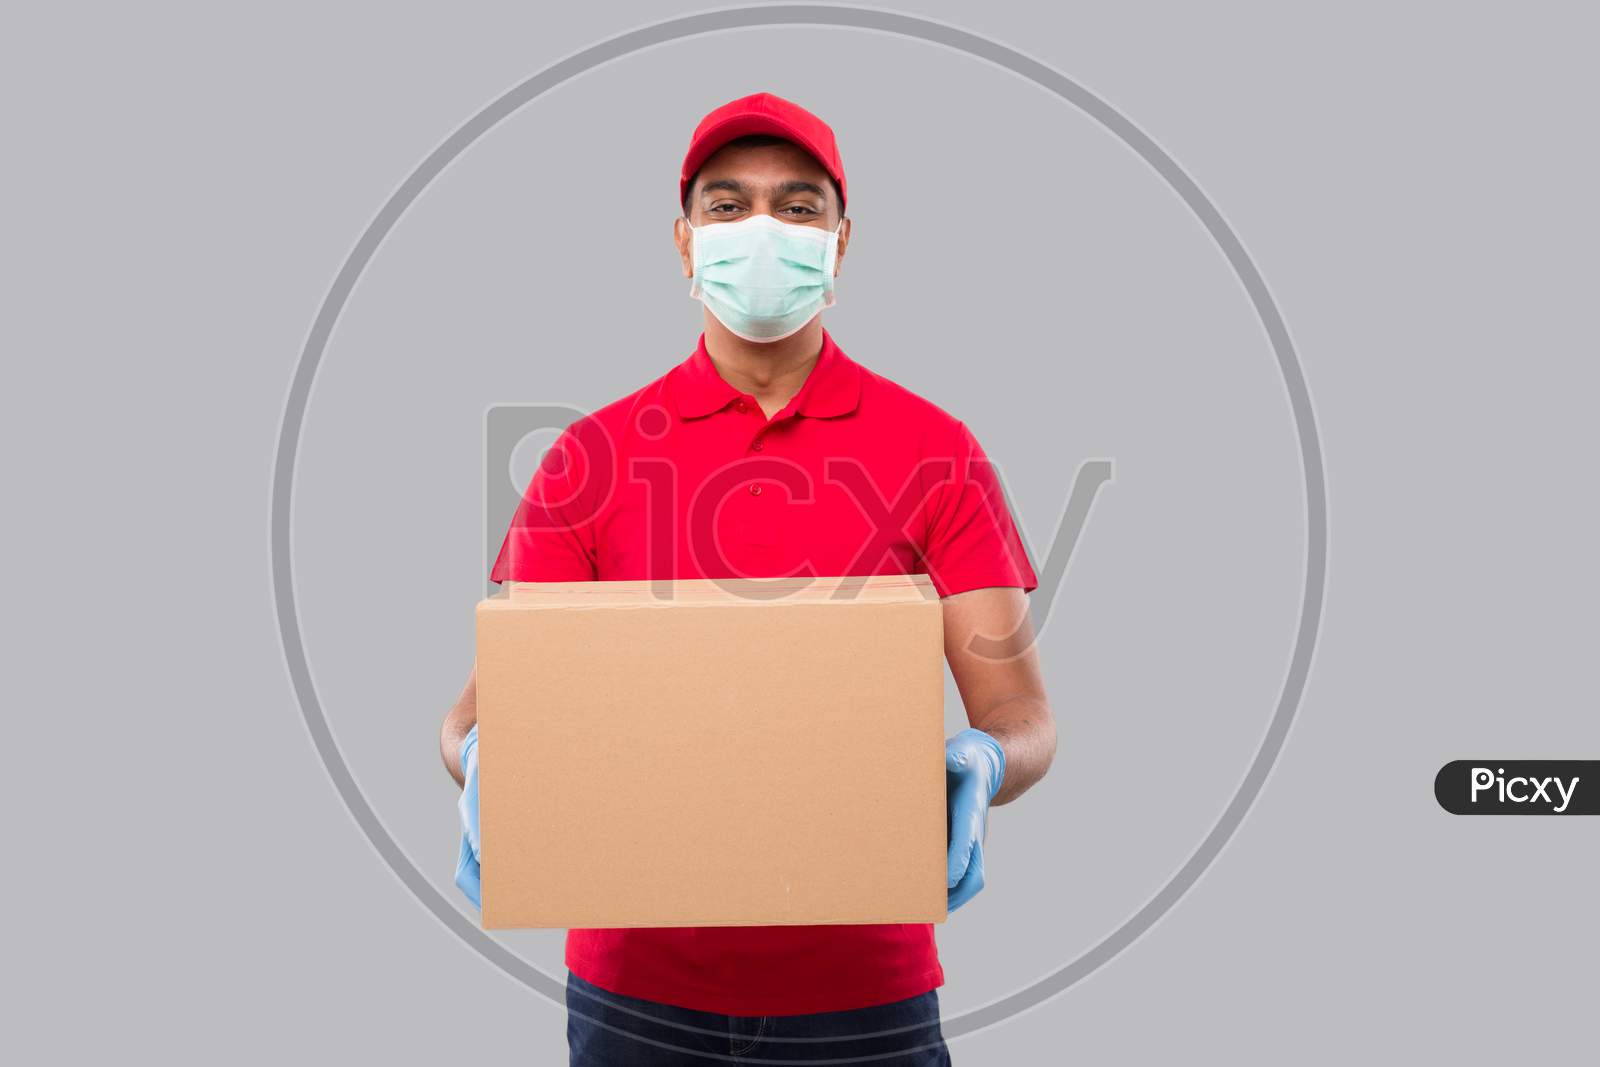 Delivery Man Holding Box In Hands Wearing Medical Mask And Gloves Isolated. Red Tshirt Indian Delivery Boy Watching Side. Home Delivery. Quarantine Hero.